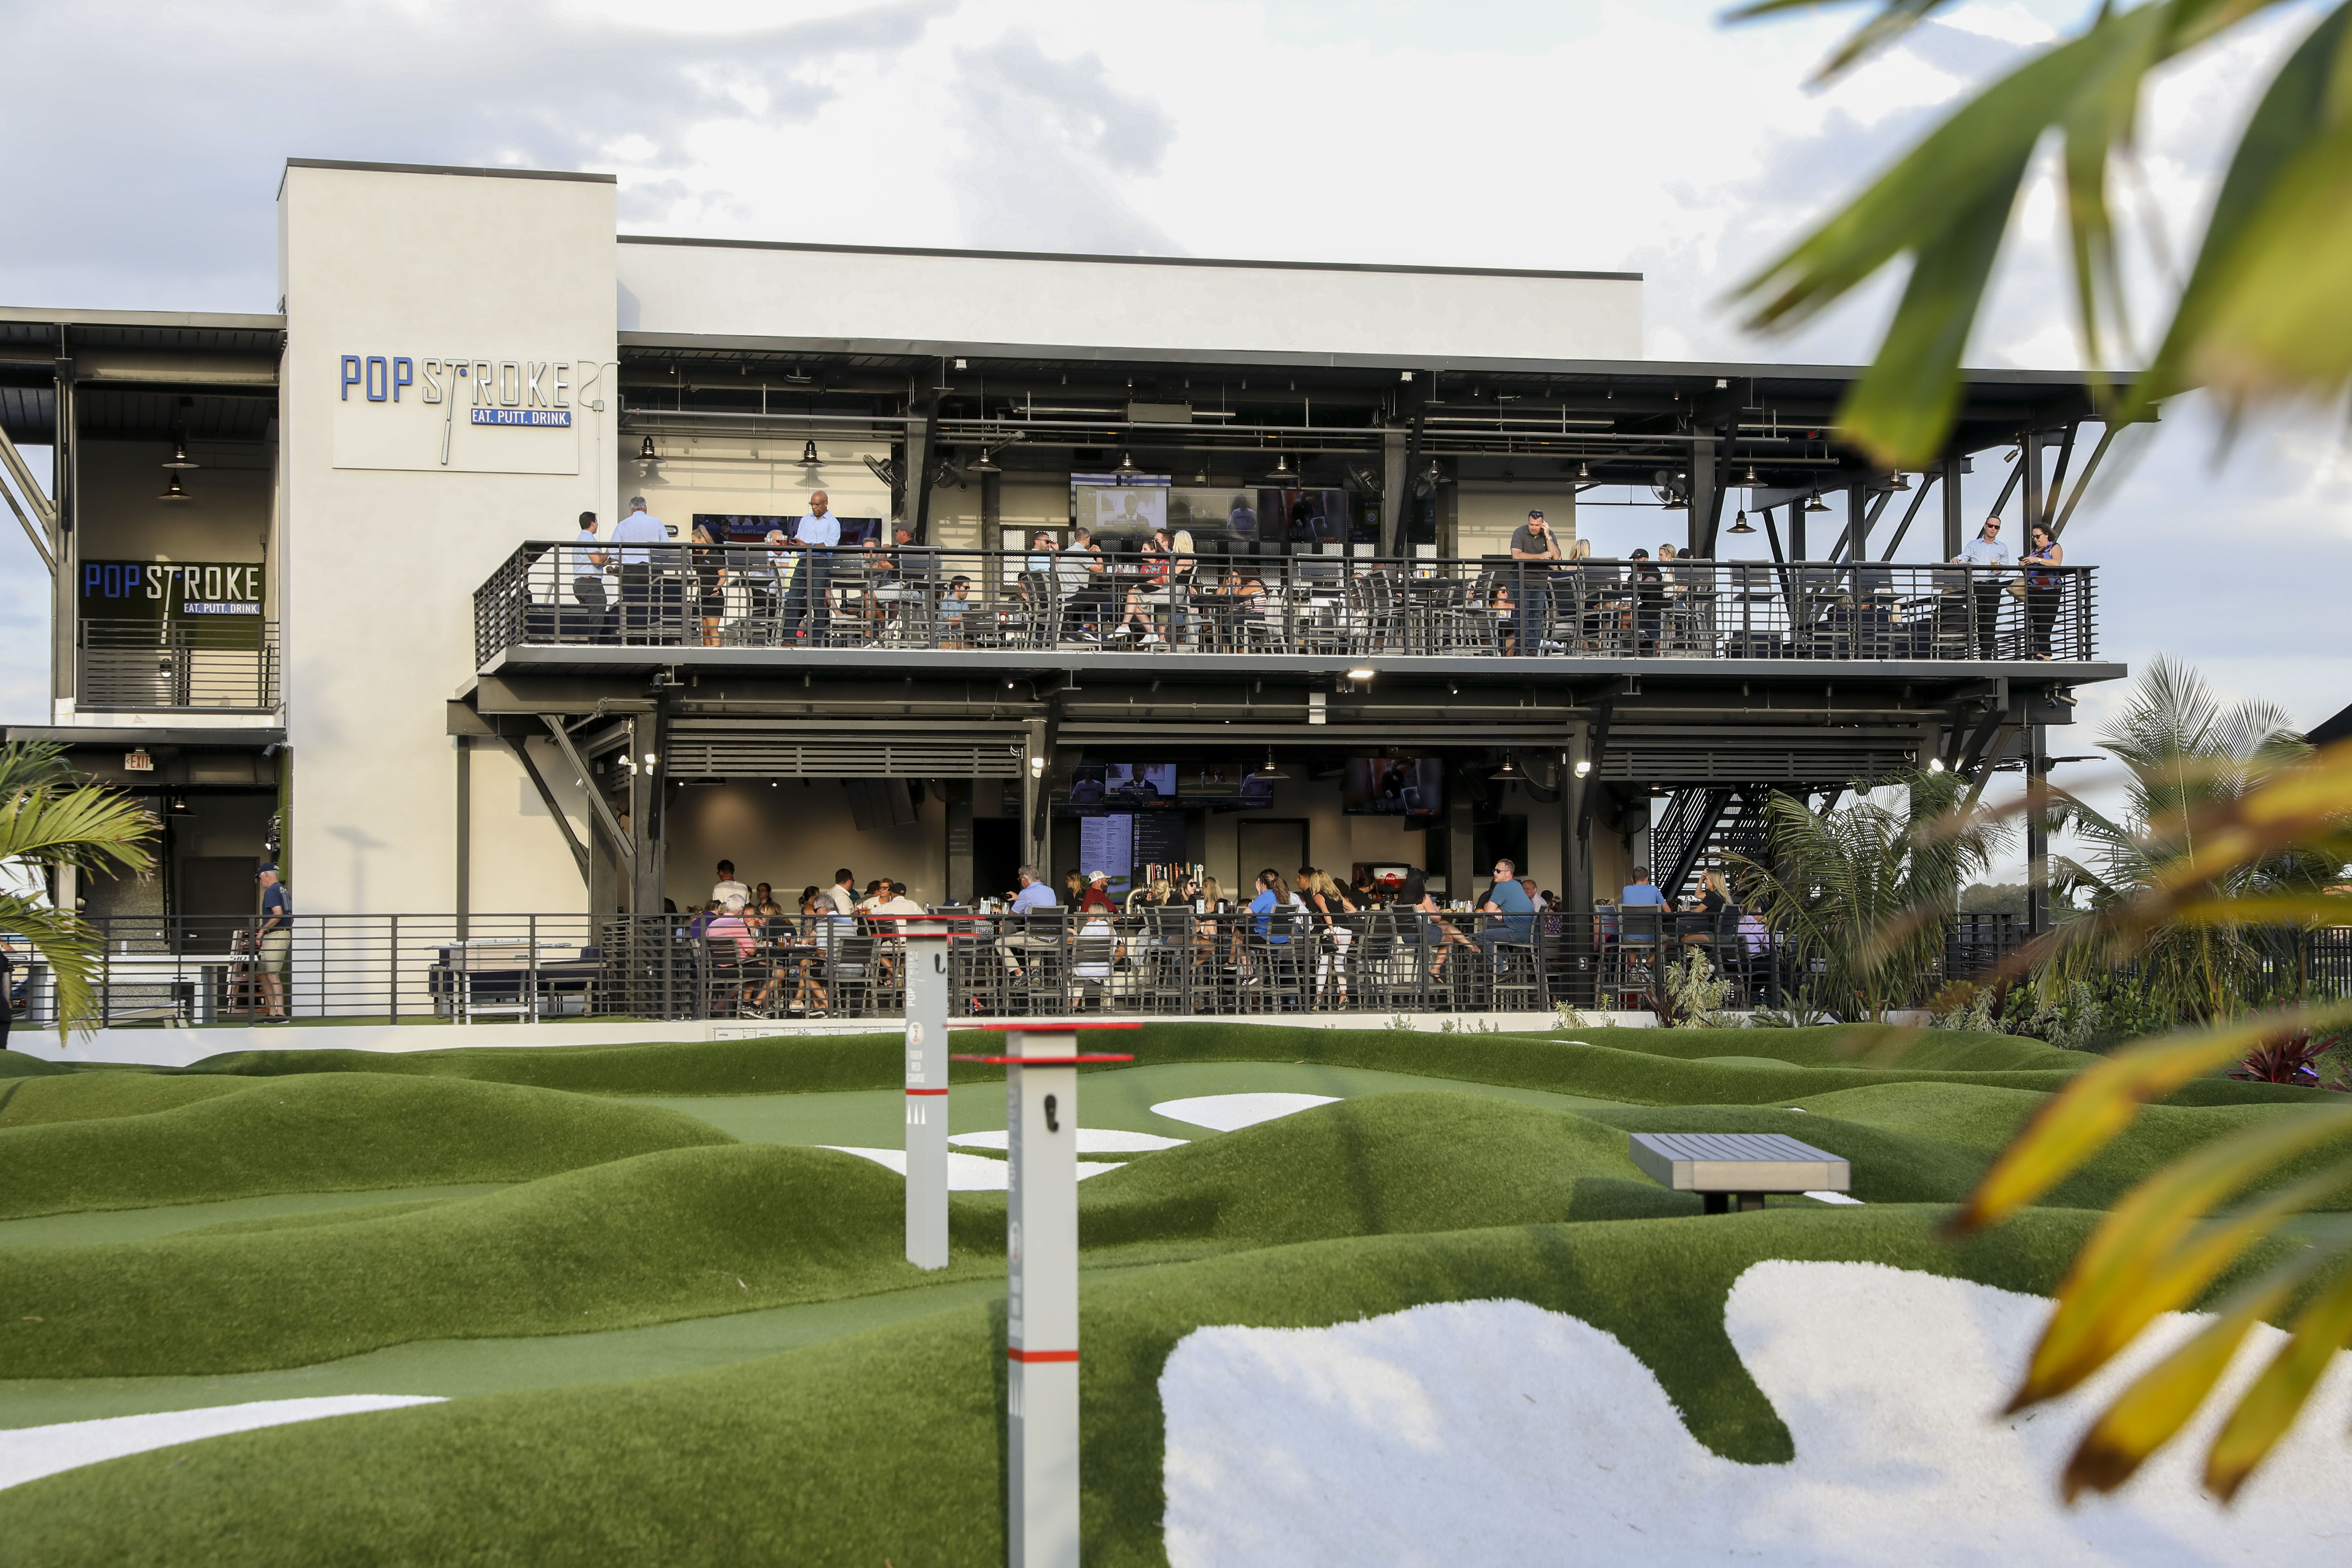 Tiger Woods golf entertainment center opens in Sarasota. Tampa is soon.